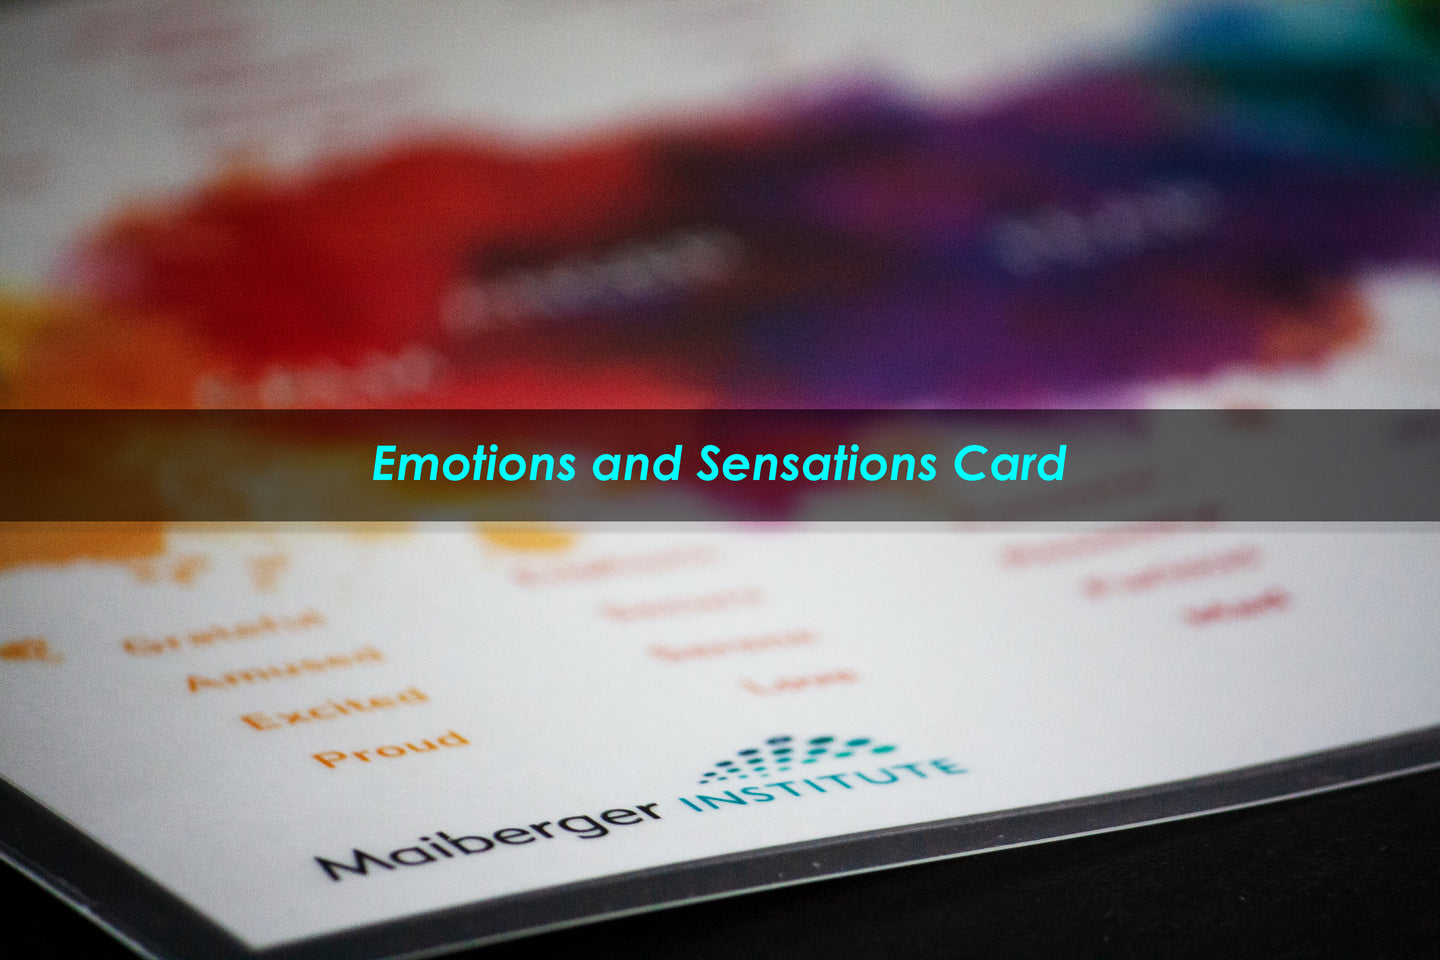 Emotions and Sensations Card